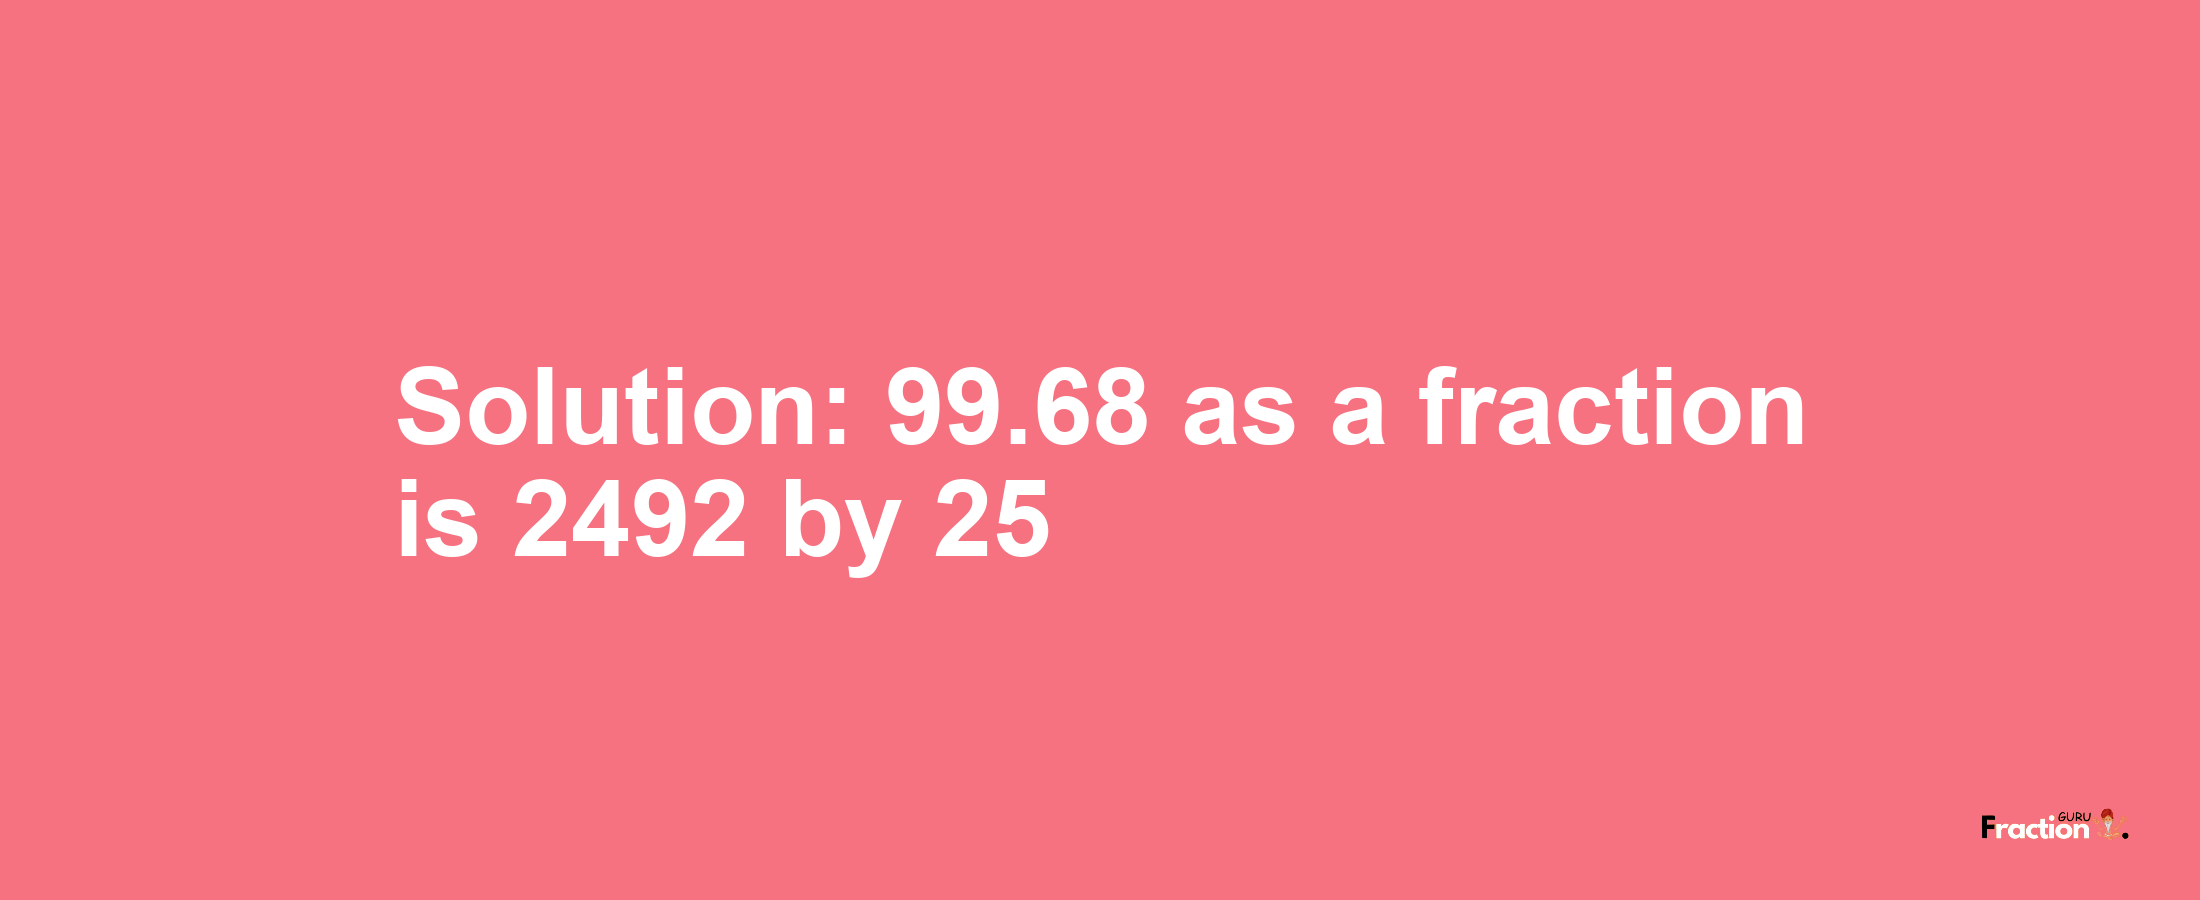 Solution:99.68 as a fraction is 2492/25